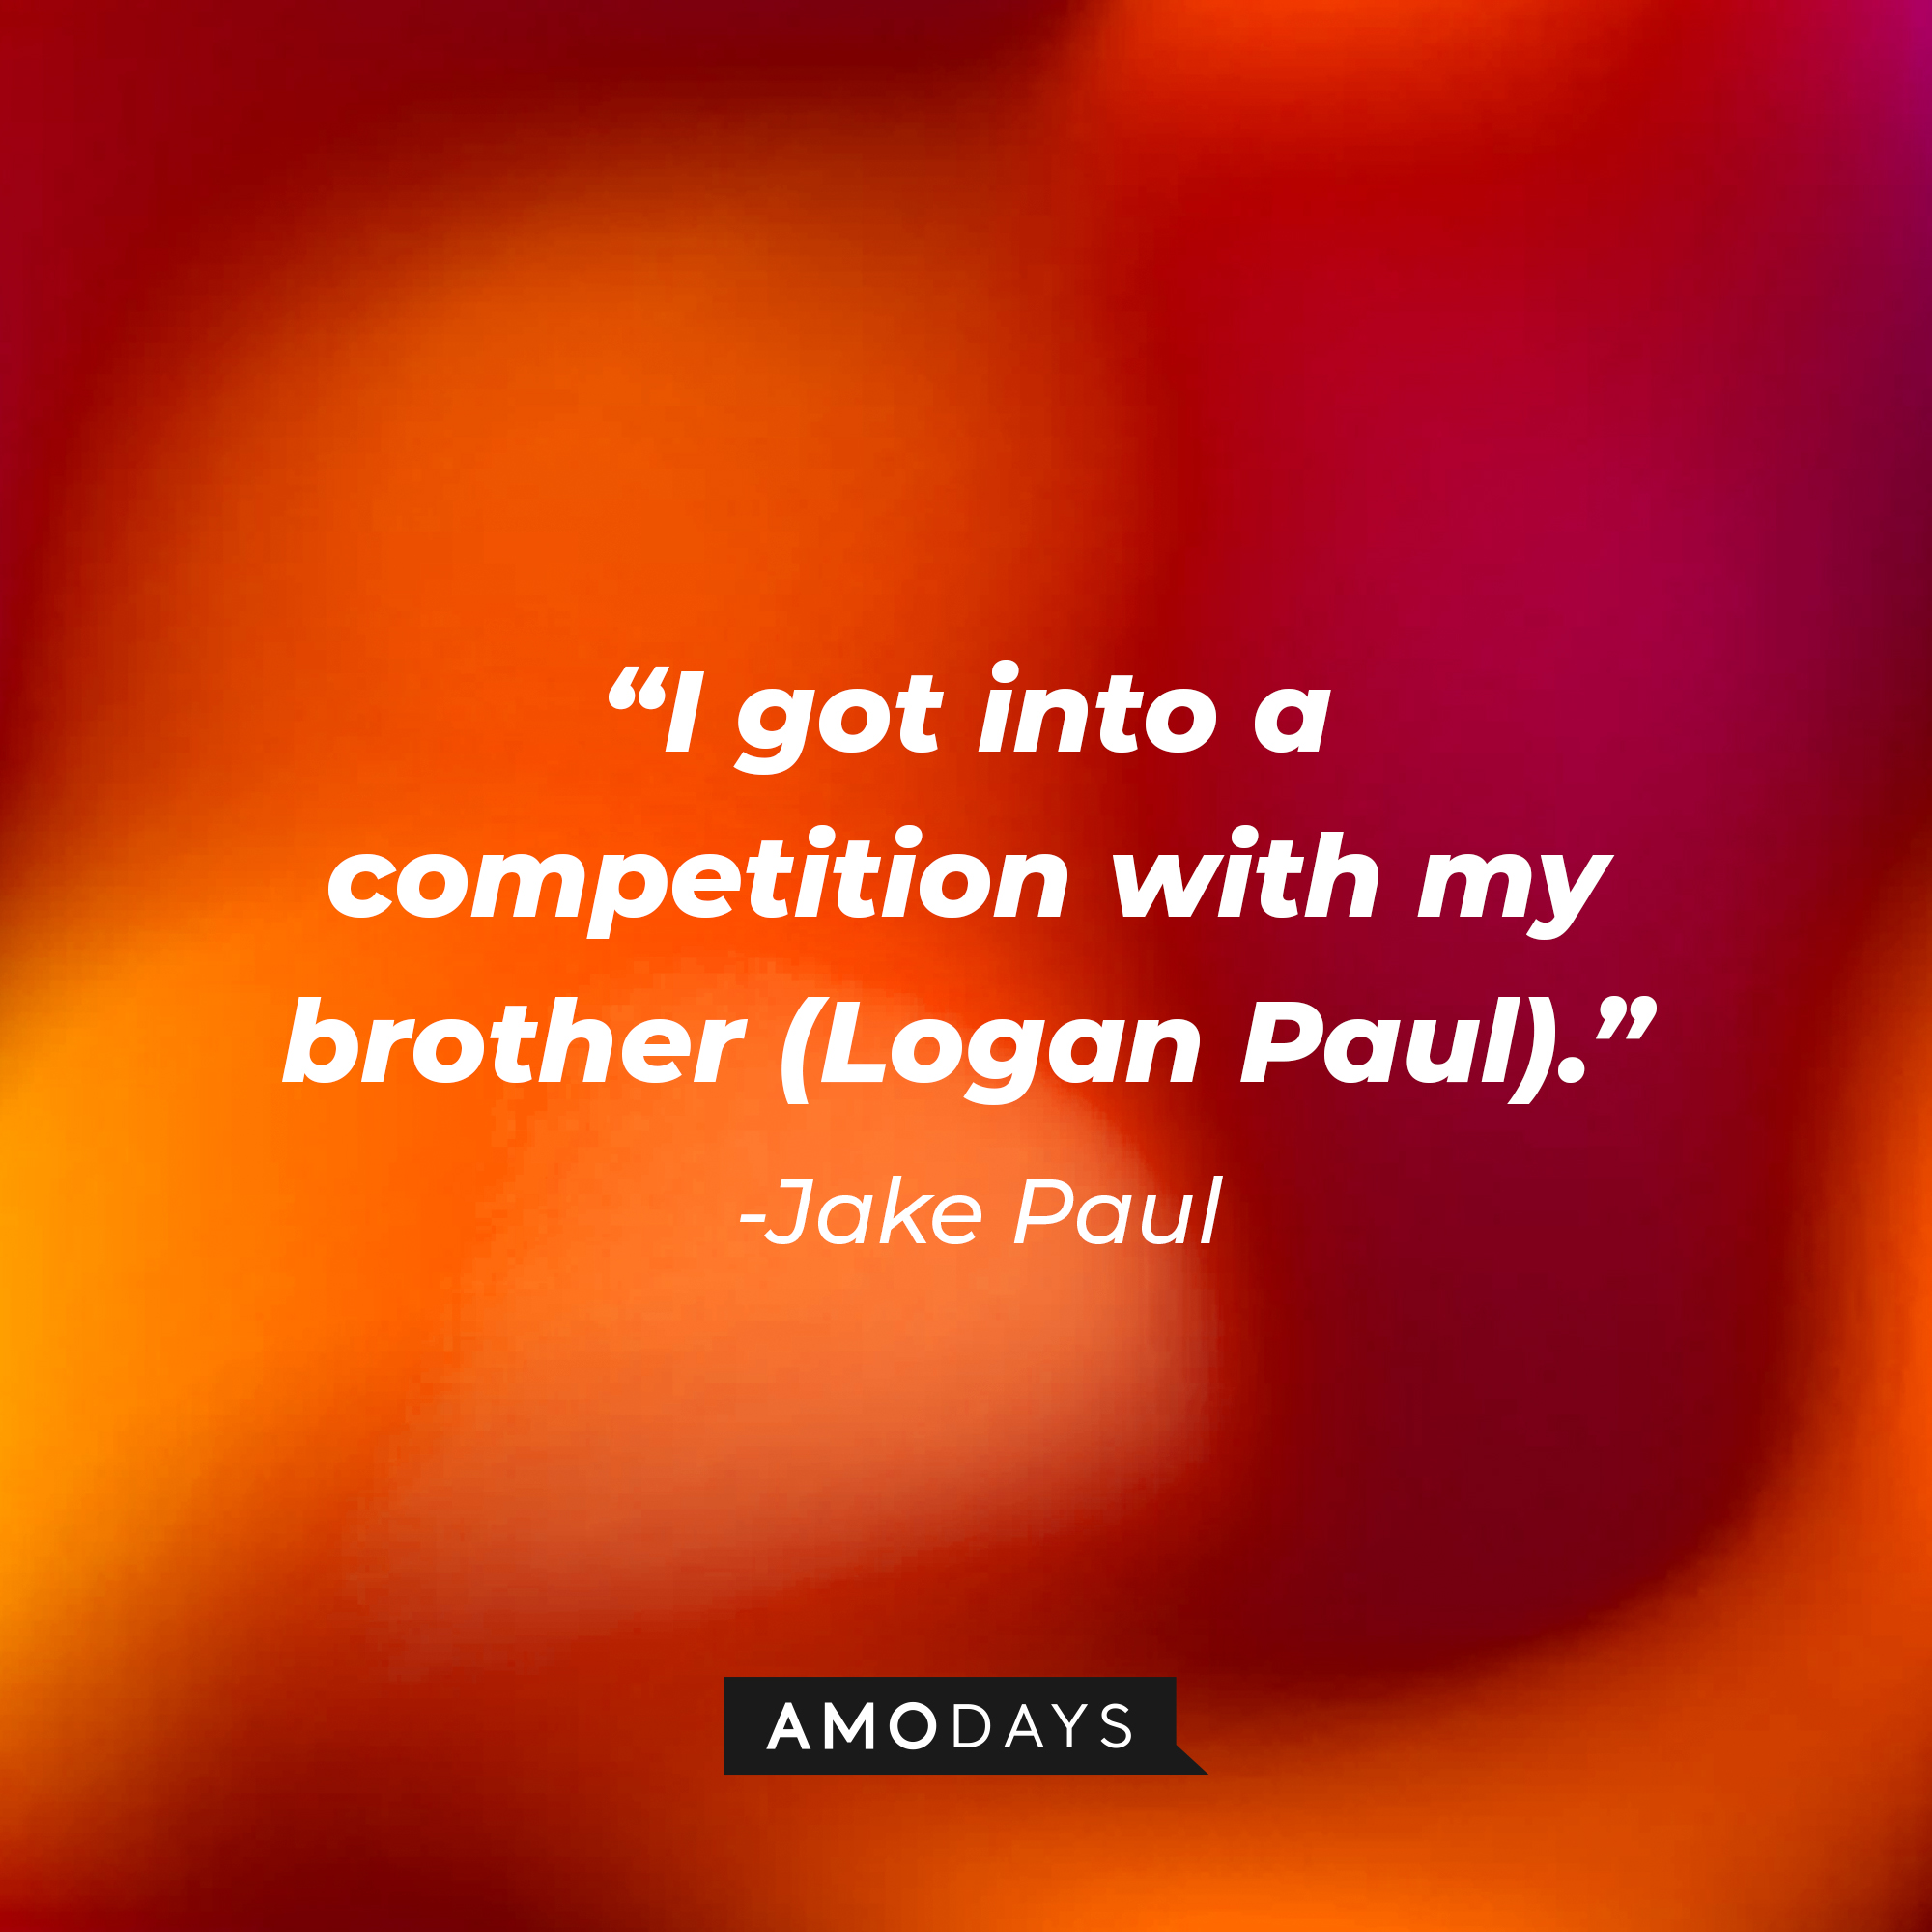 Jake Paul’s quote: "I got into a competition with my brother (Logan Paul)." | Image: Amodays